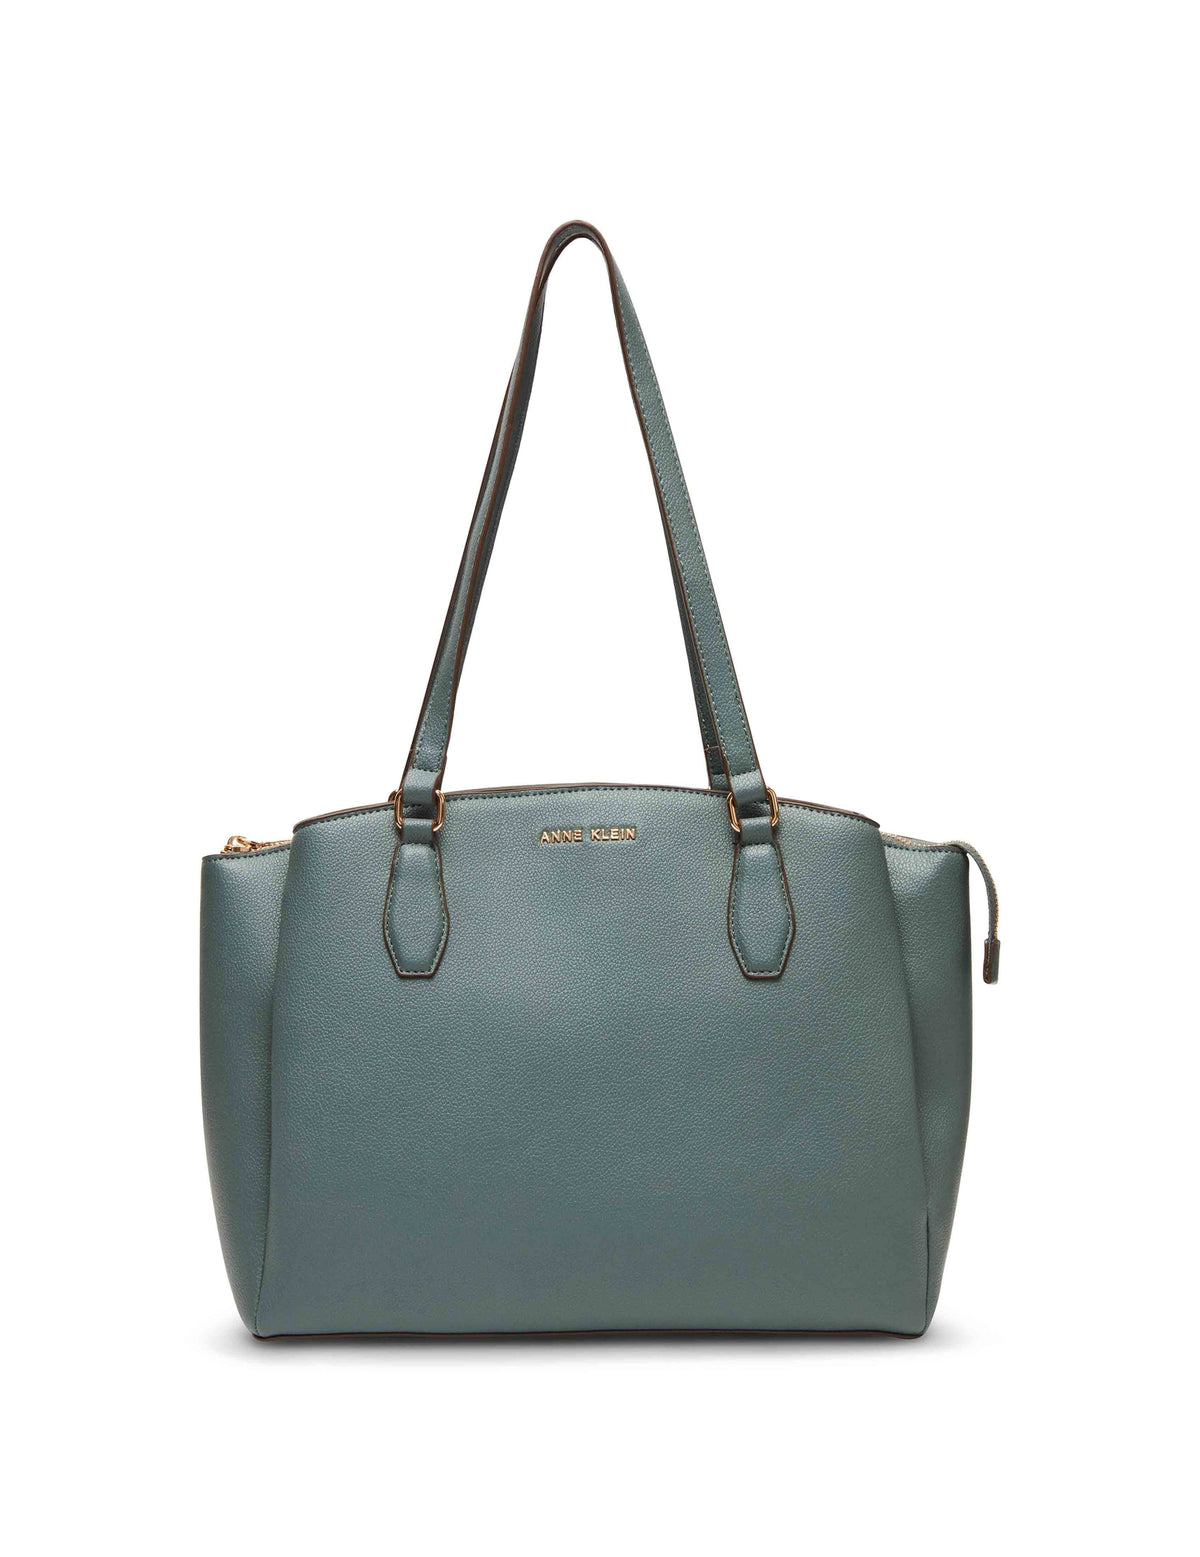 Anne Klein Rosemary Triple Compartment Tote